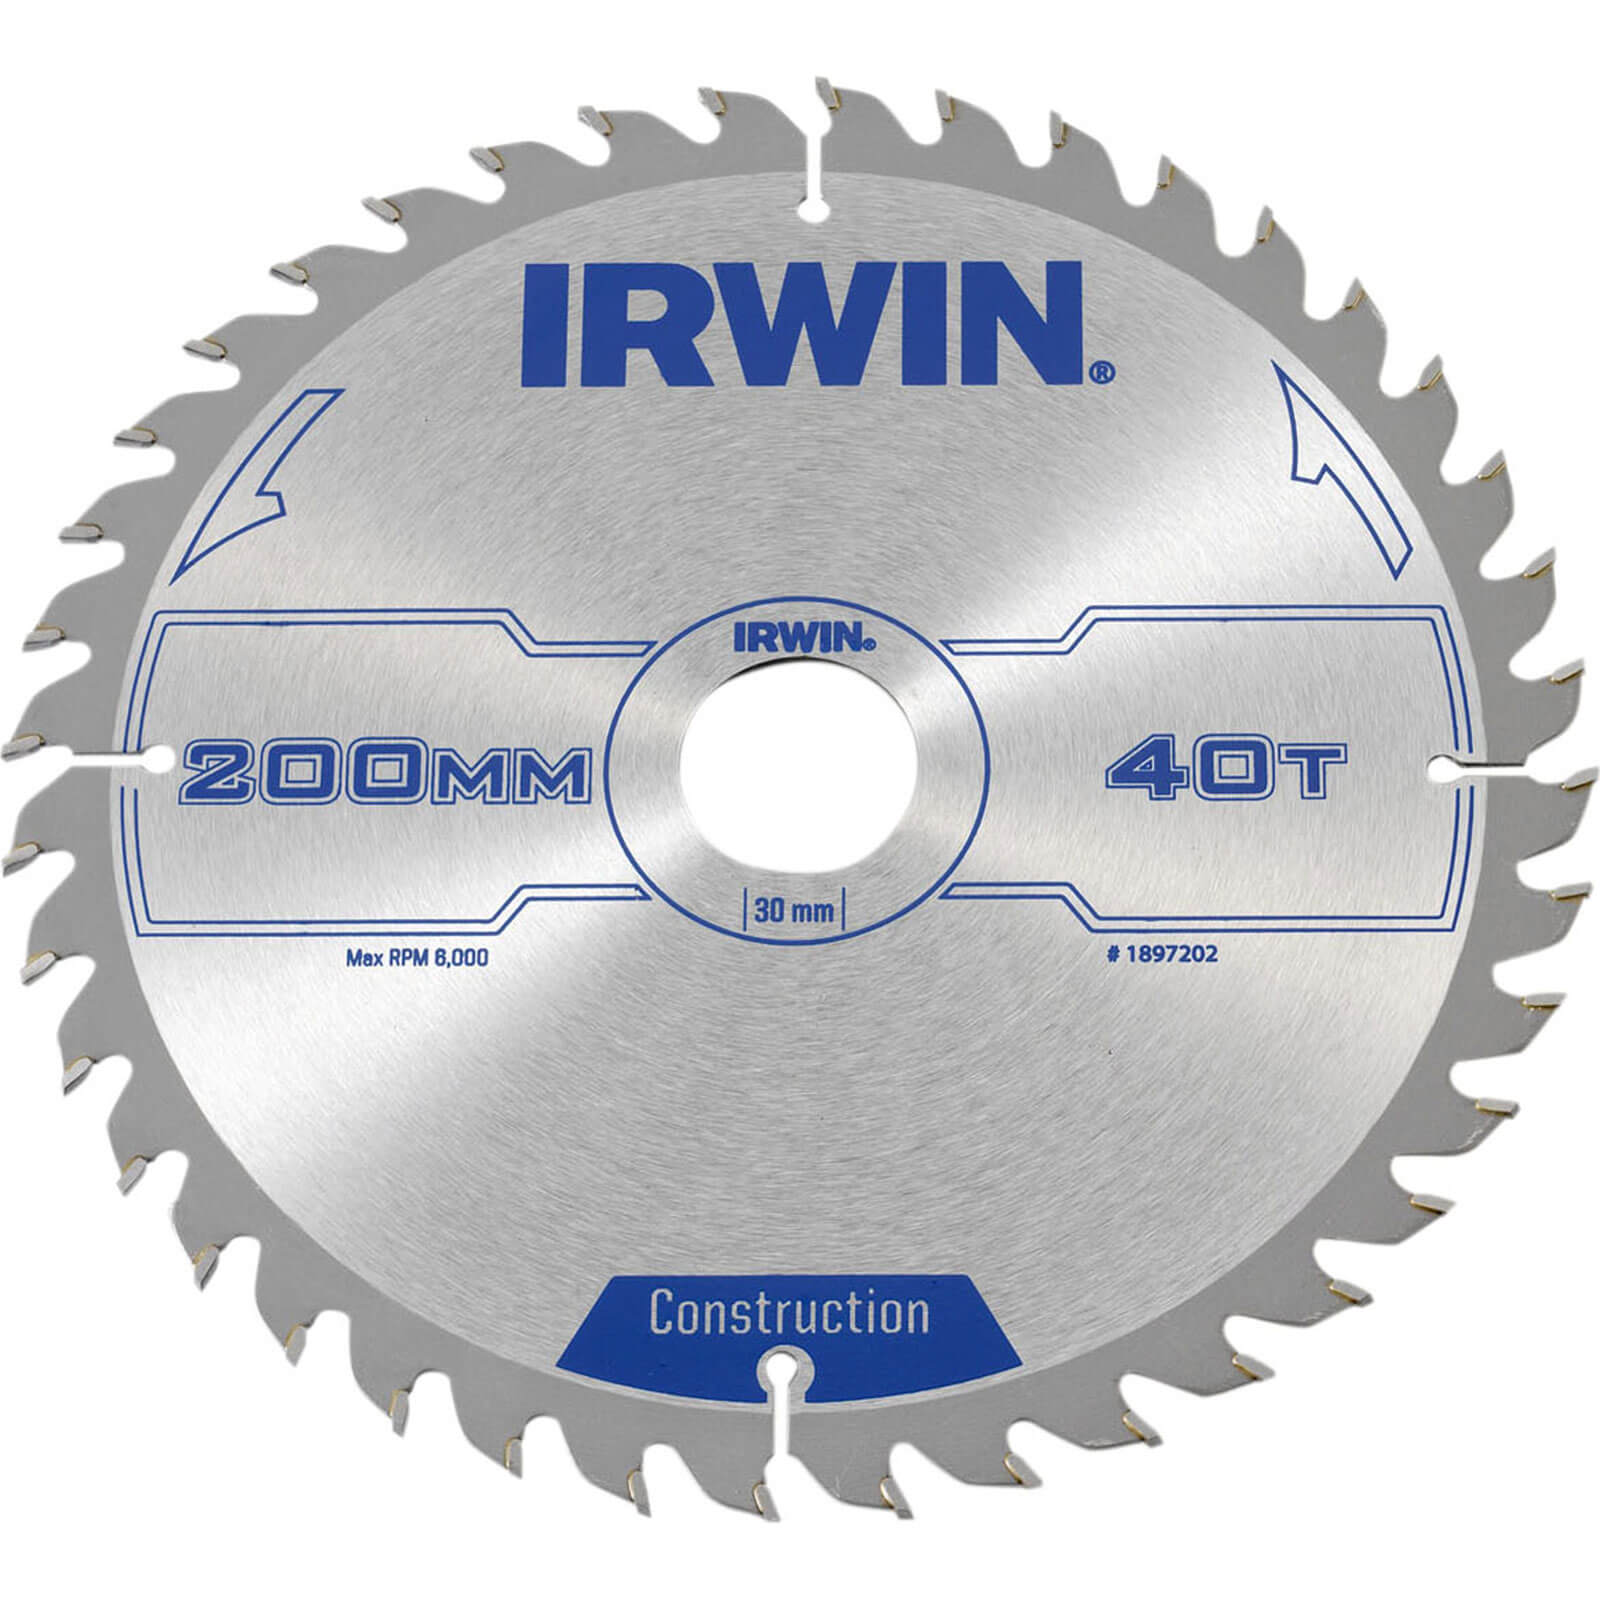 Image of Irwin ATB Construction Circular Saw Blade 200mm 40T 30mm